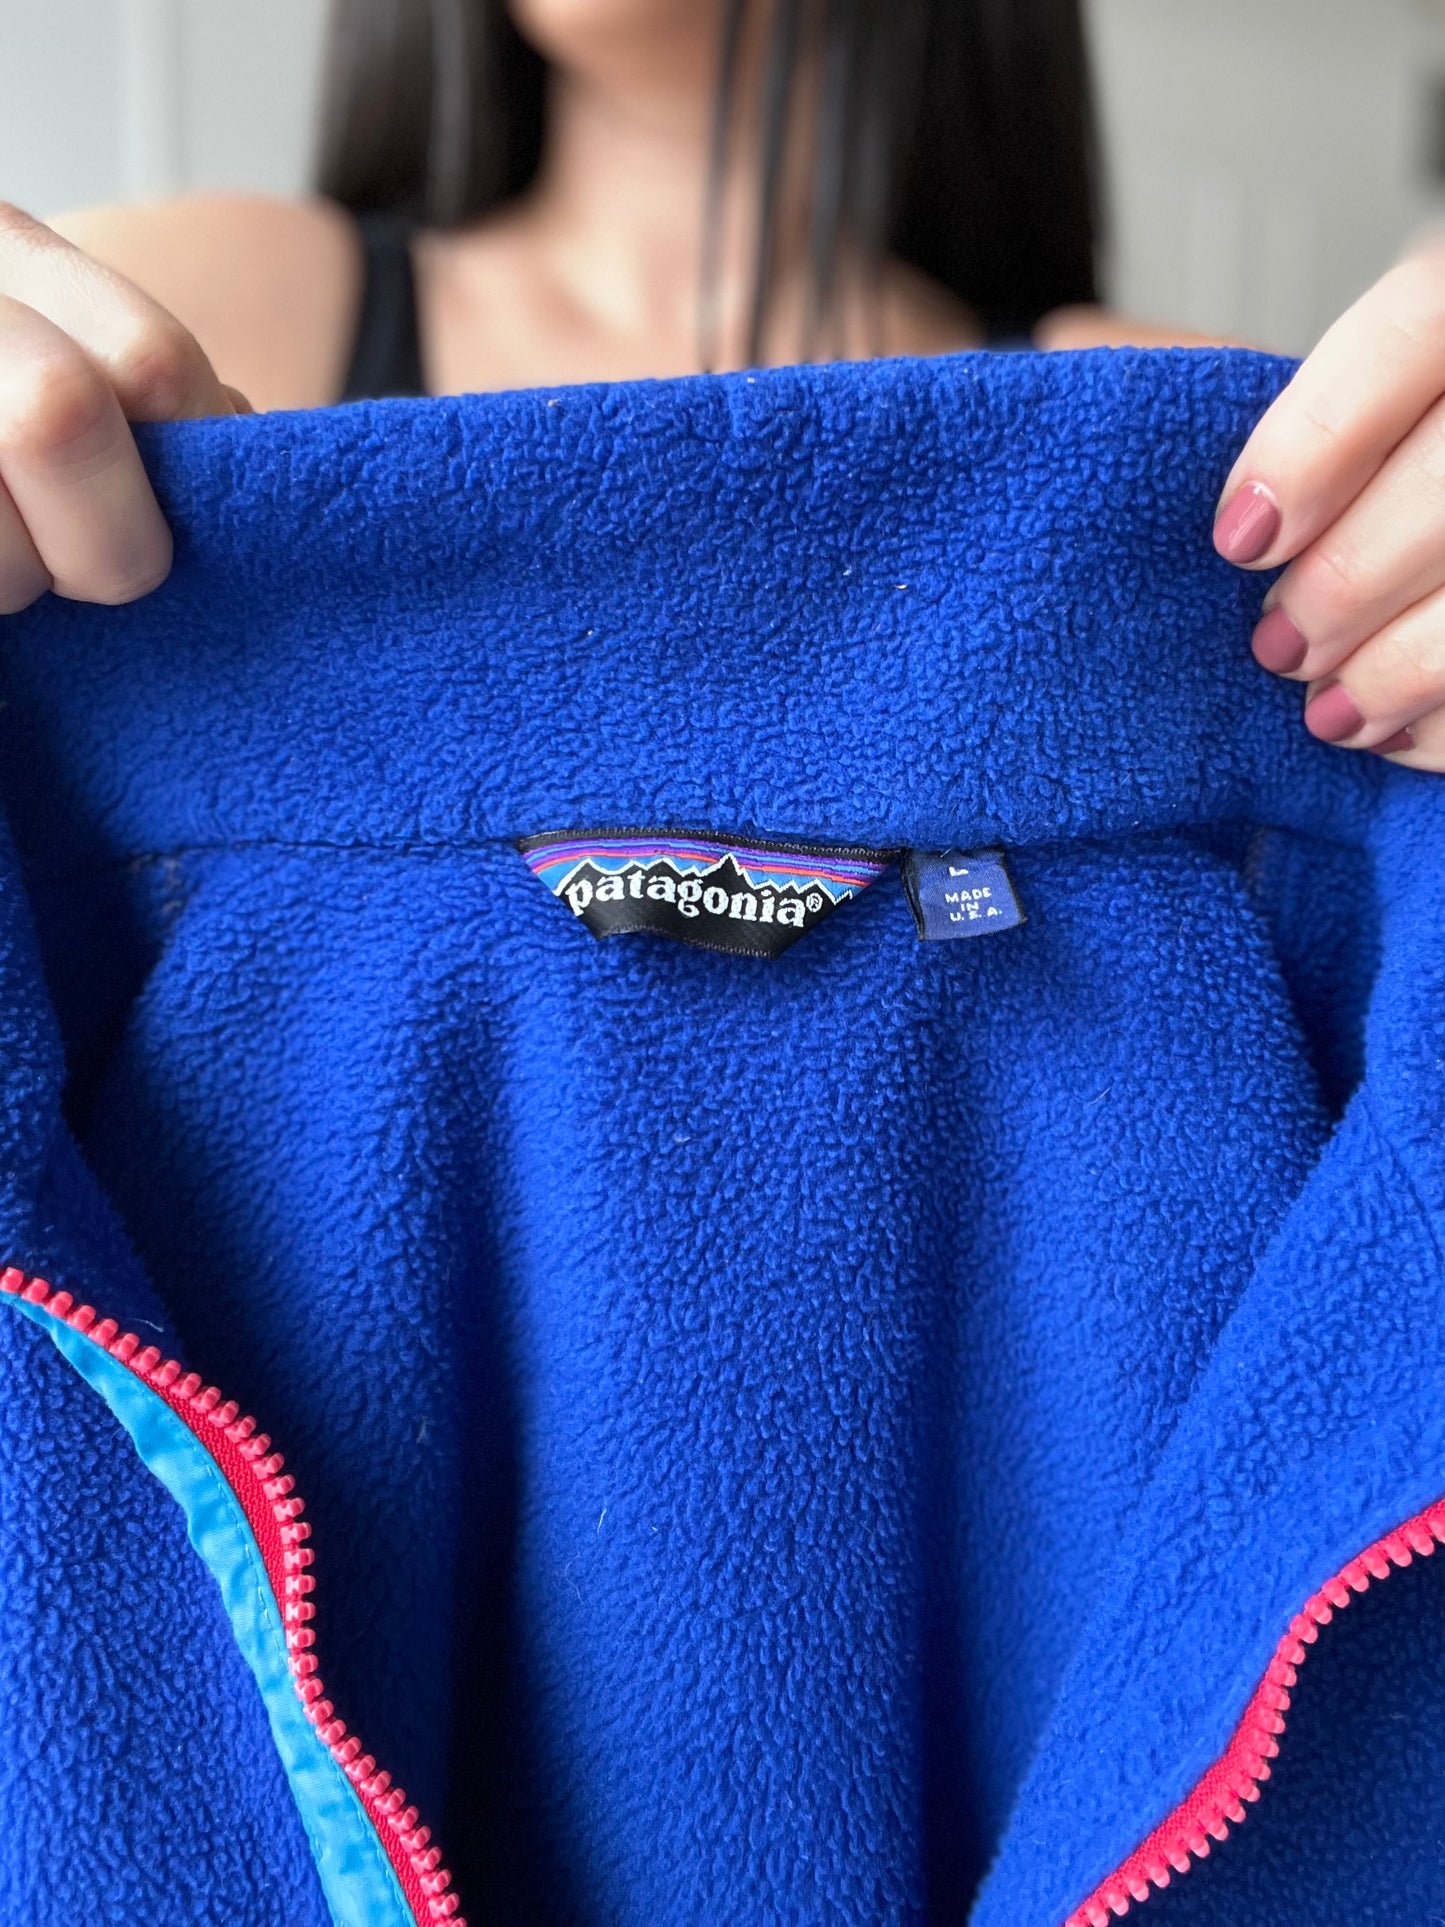 90s Patagonia Fleece Pullover - Size XL